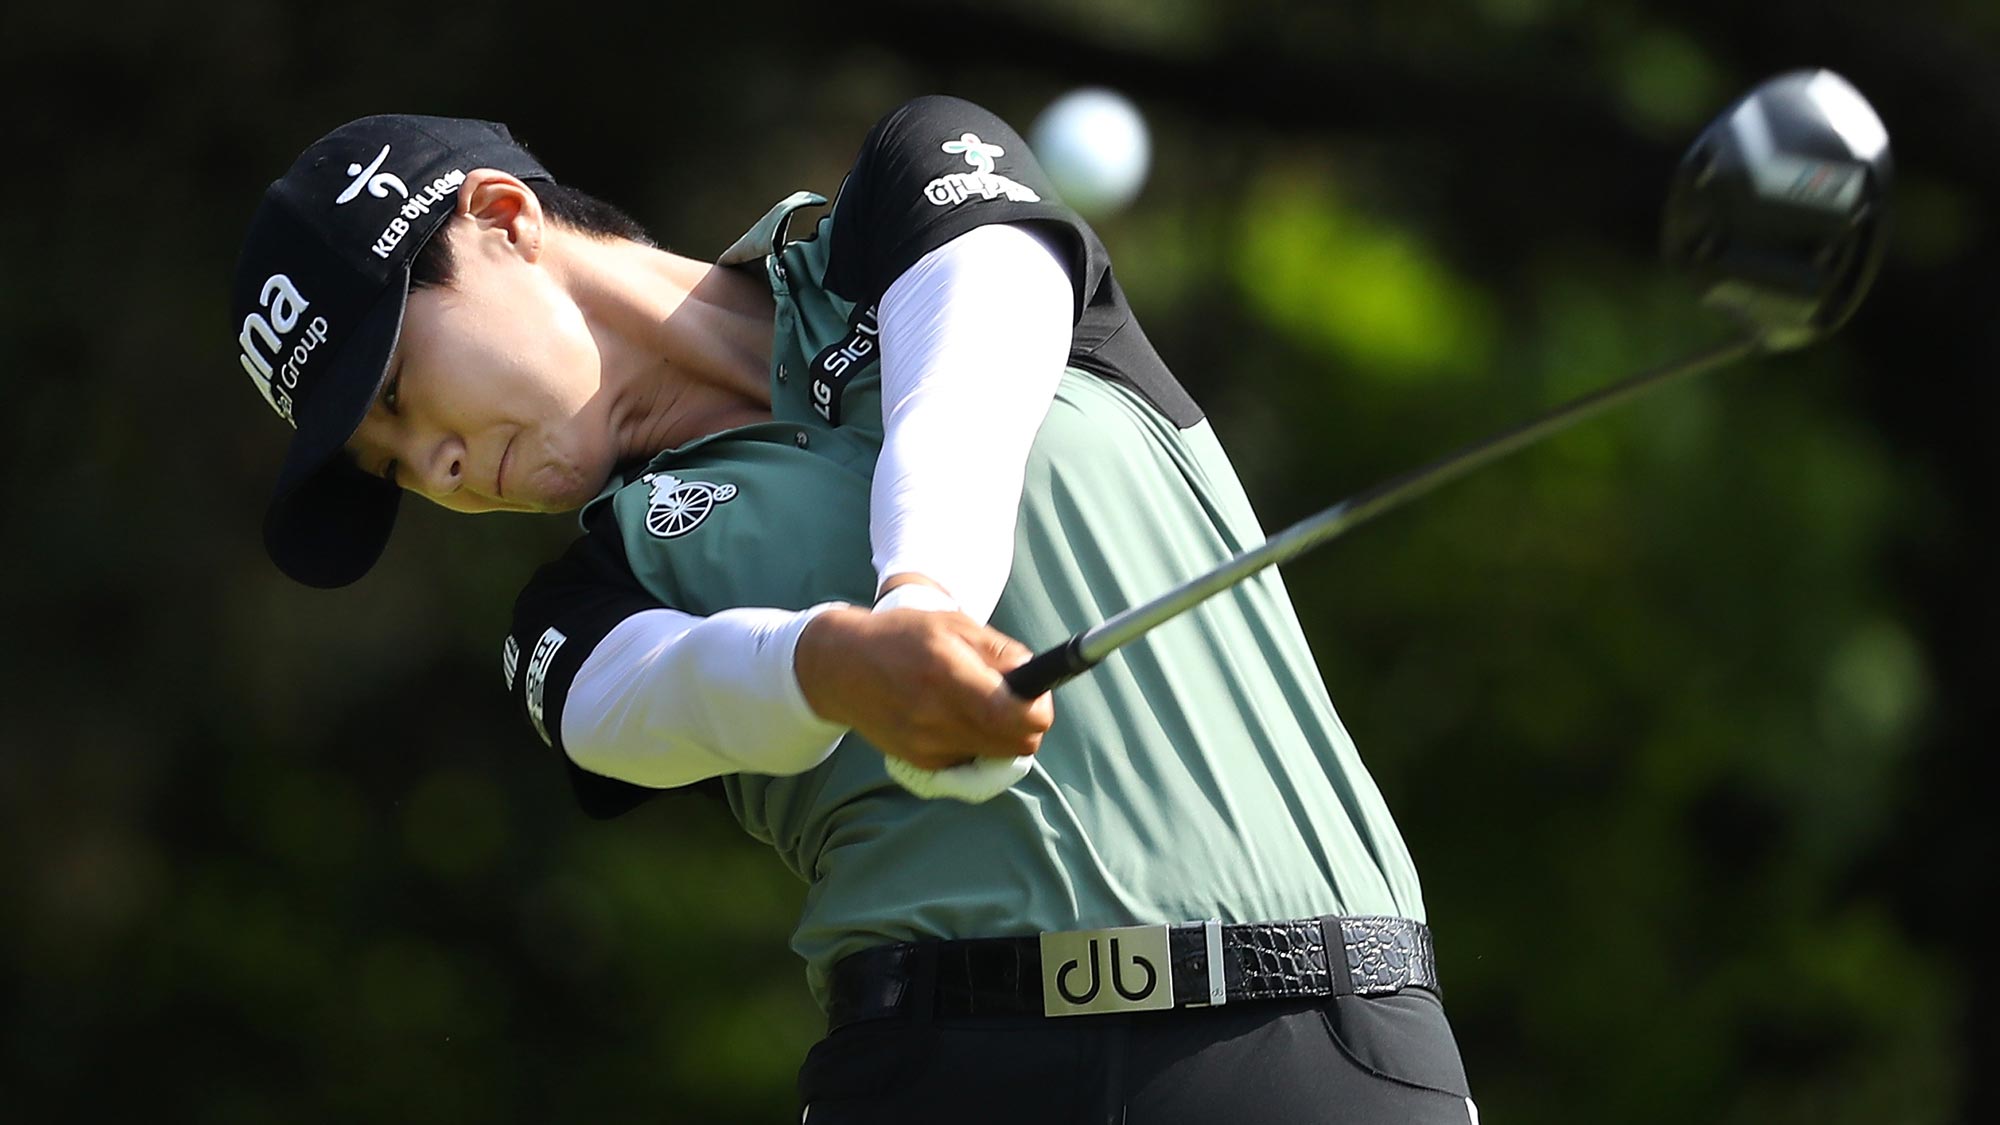 Sung Hyun Park of Korea hits her drive on the second hole during the final round of the 2018 KPMG Women's PGA Championship